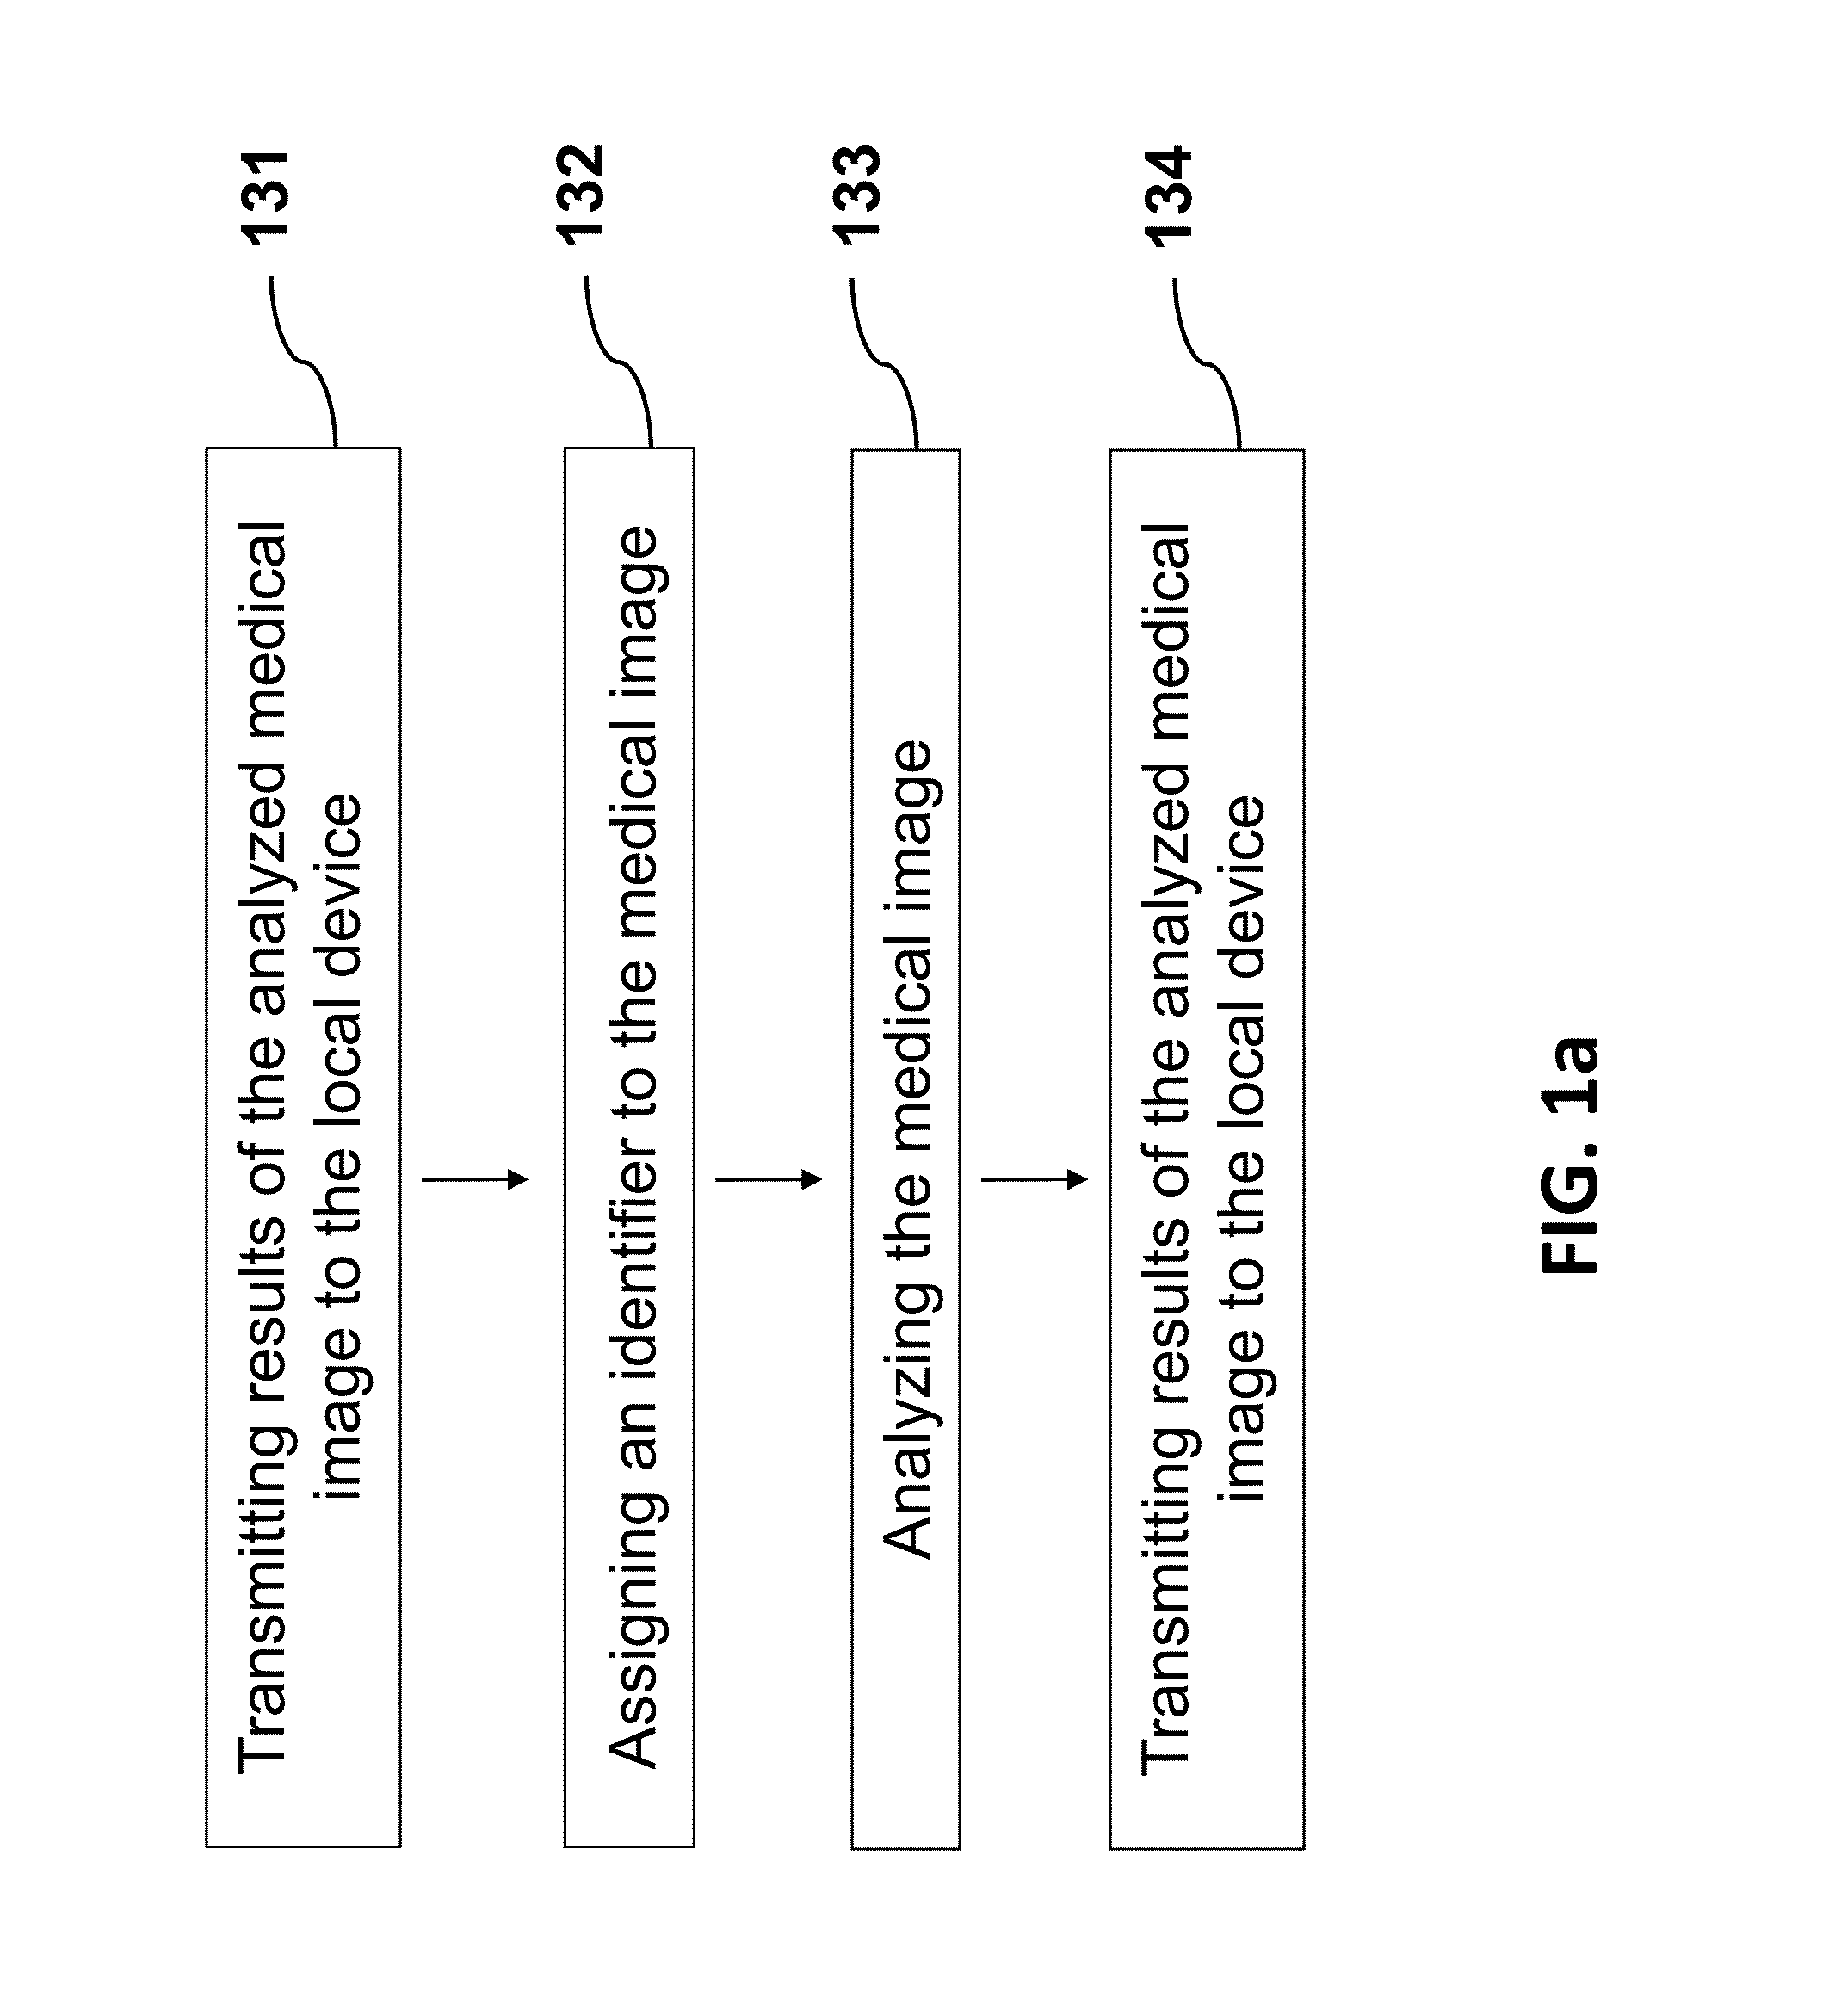 Method and apparatus for anonymized medical data analysis